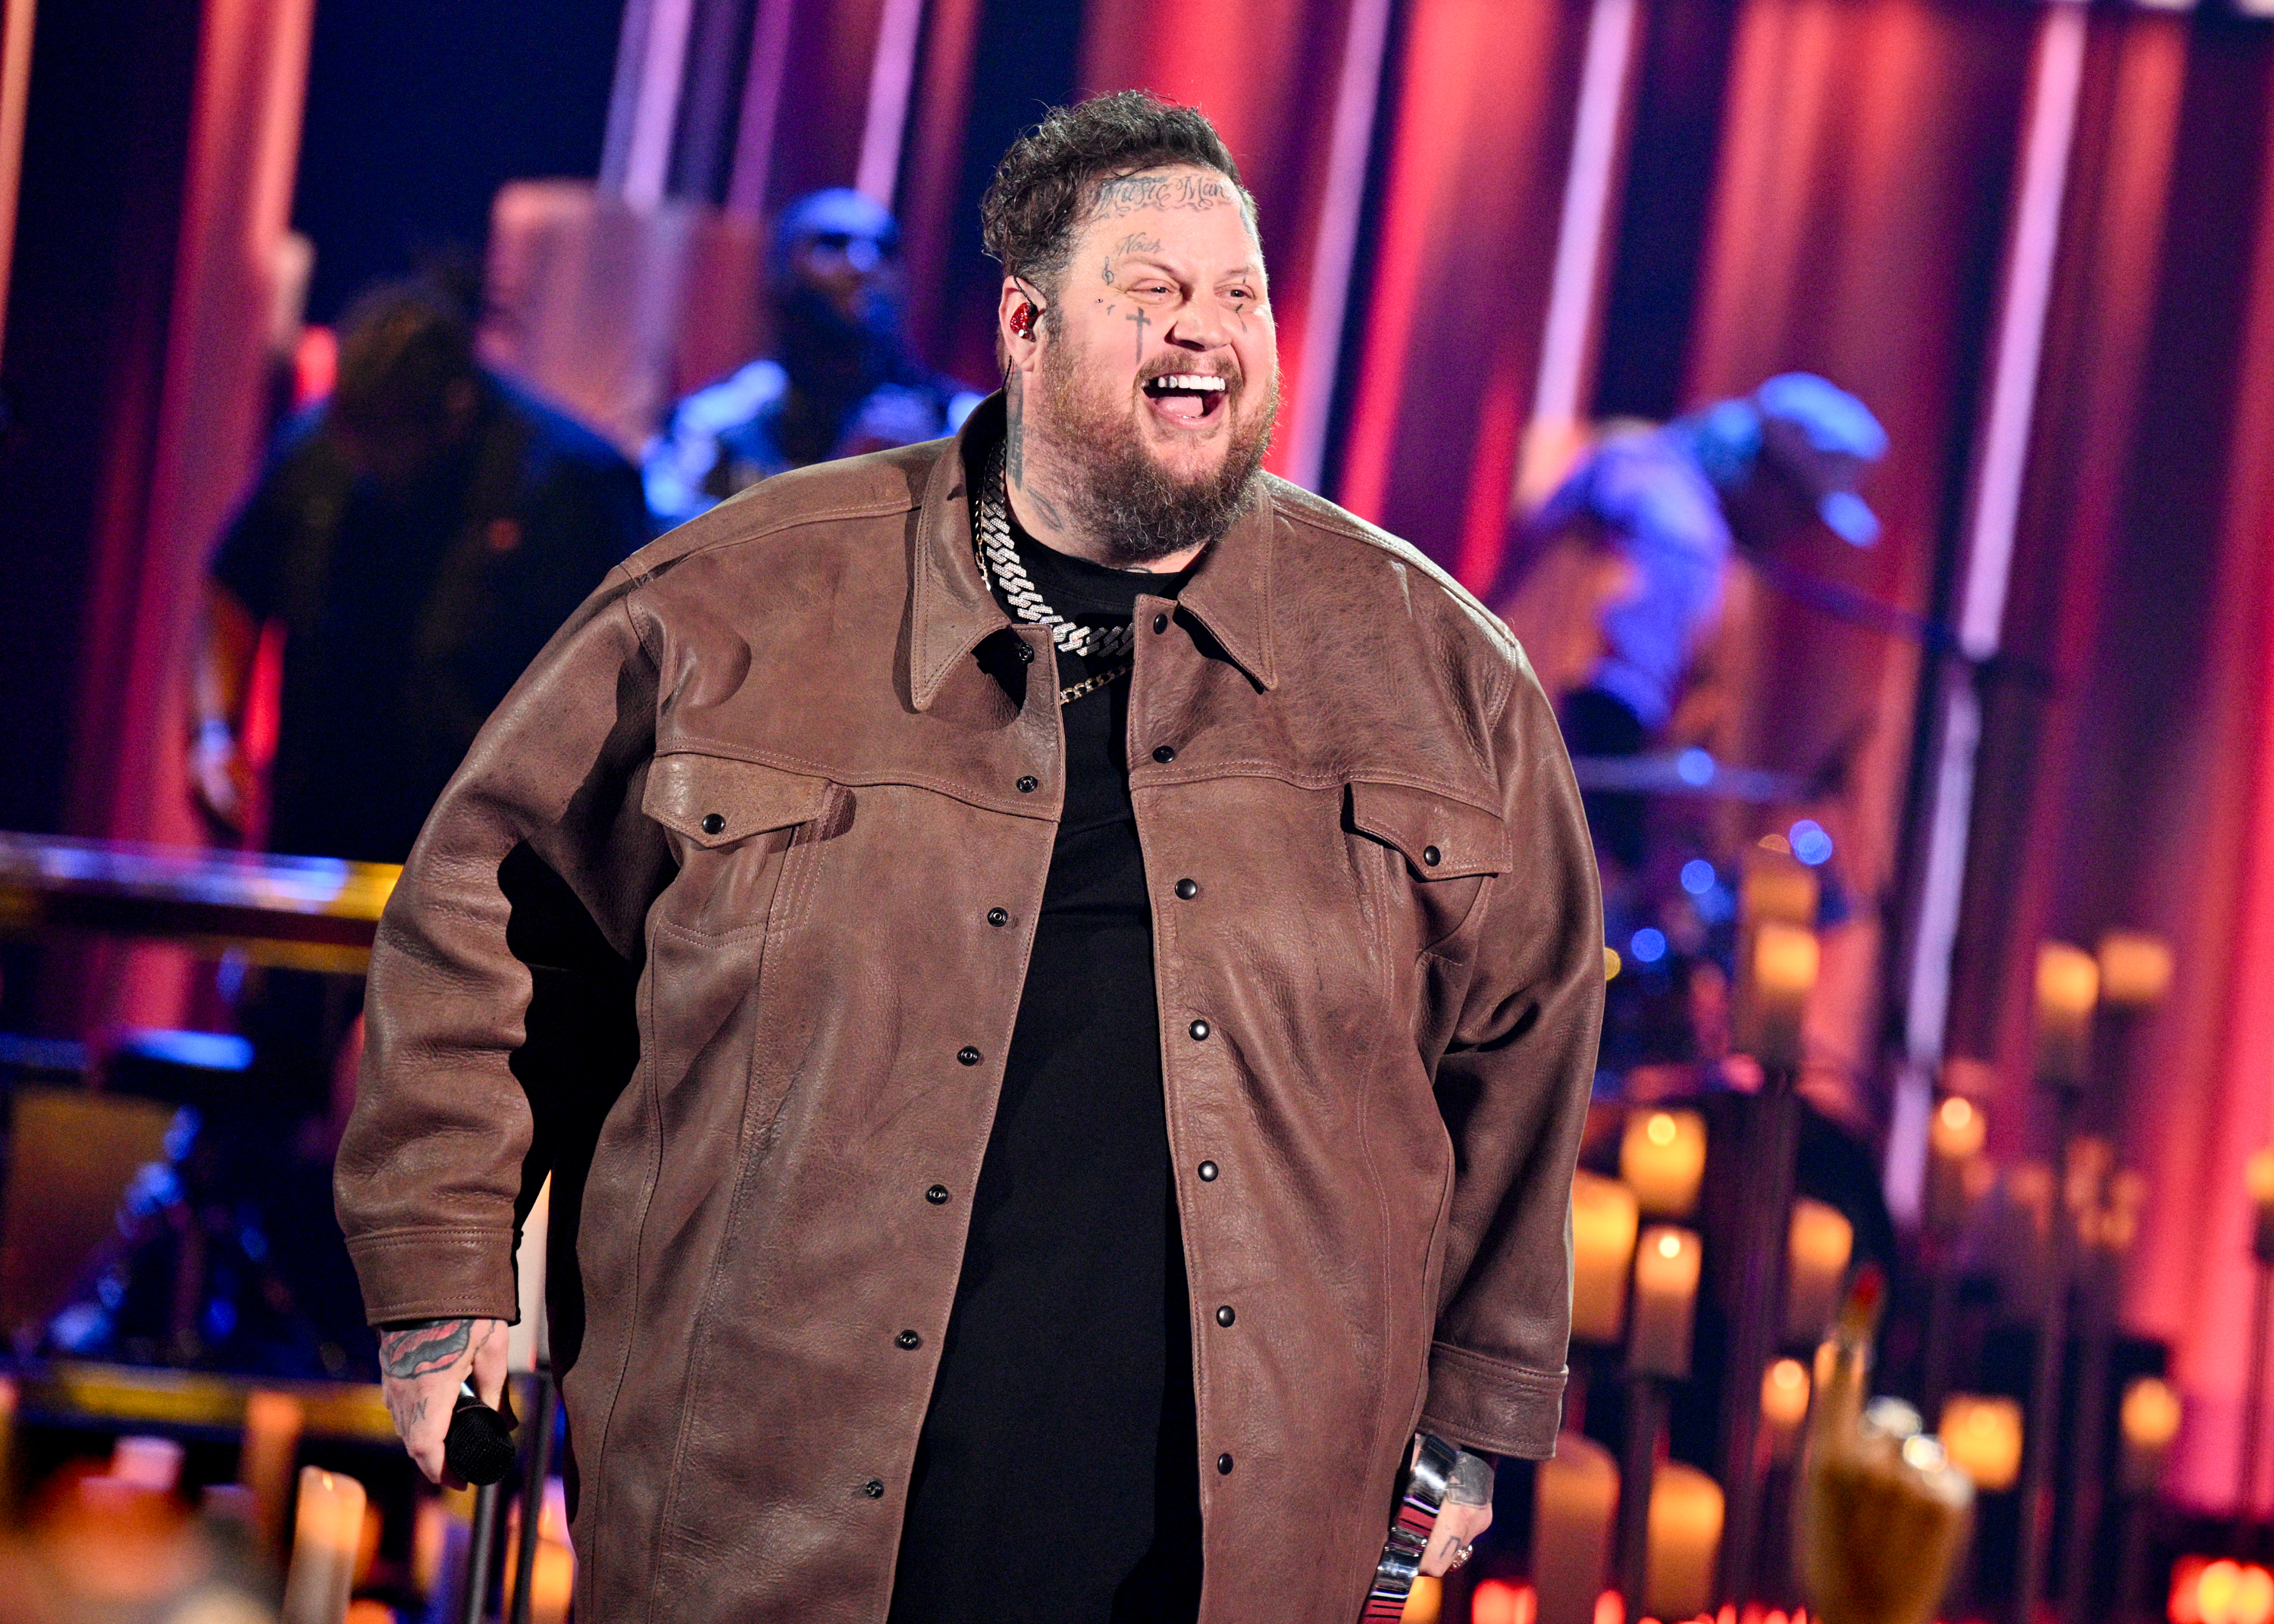 Jelly Roll recently lost 70 pounds, and he plans on losing more